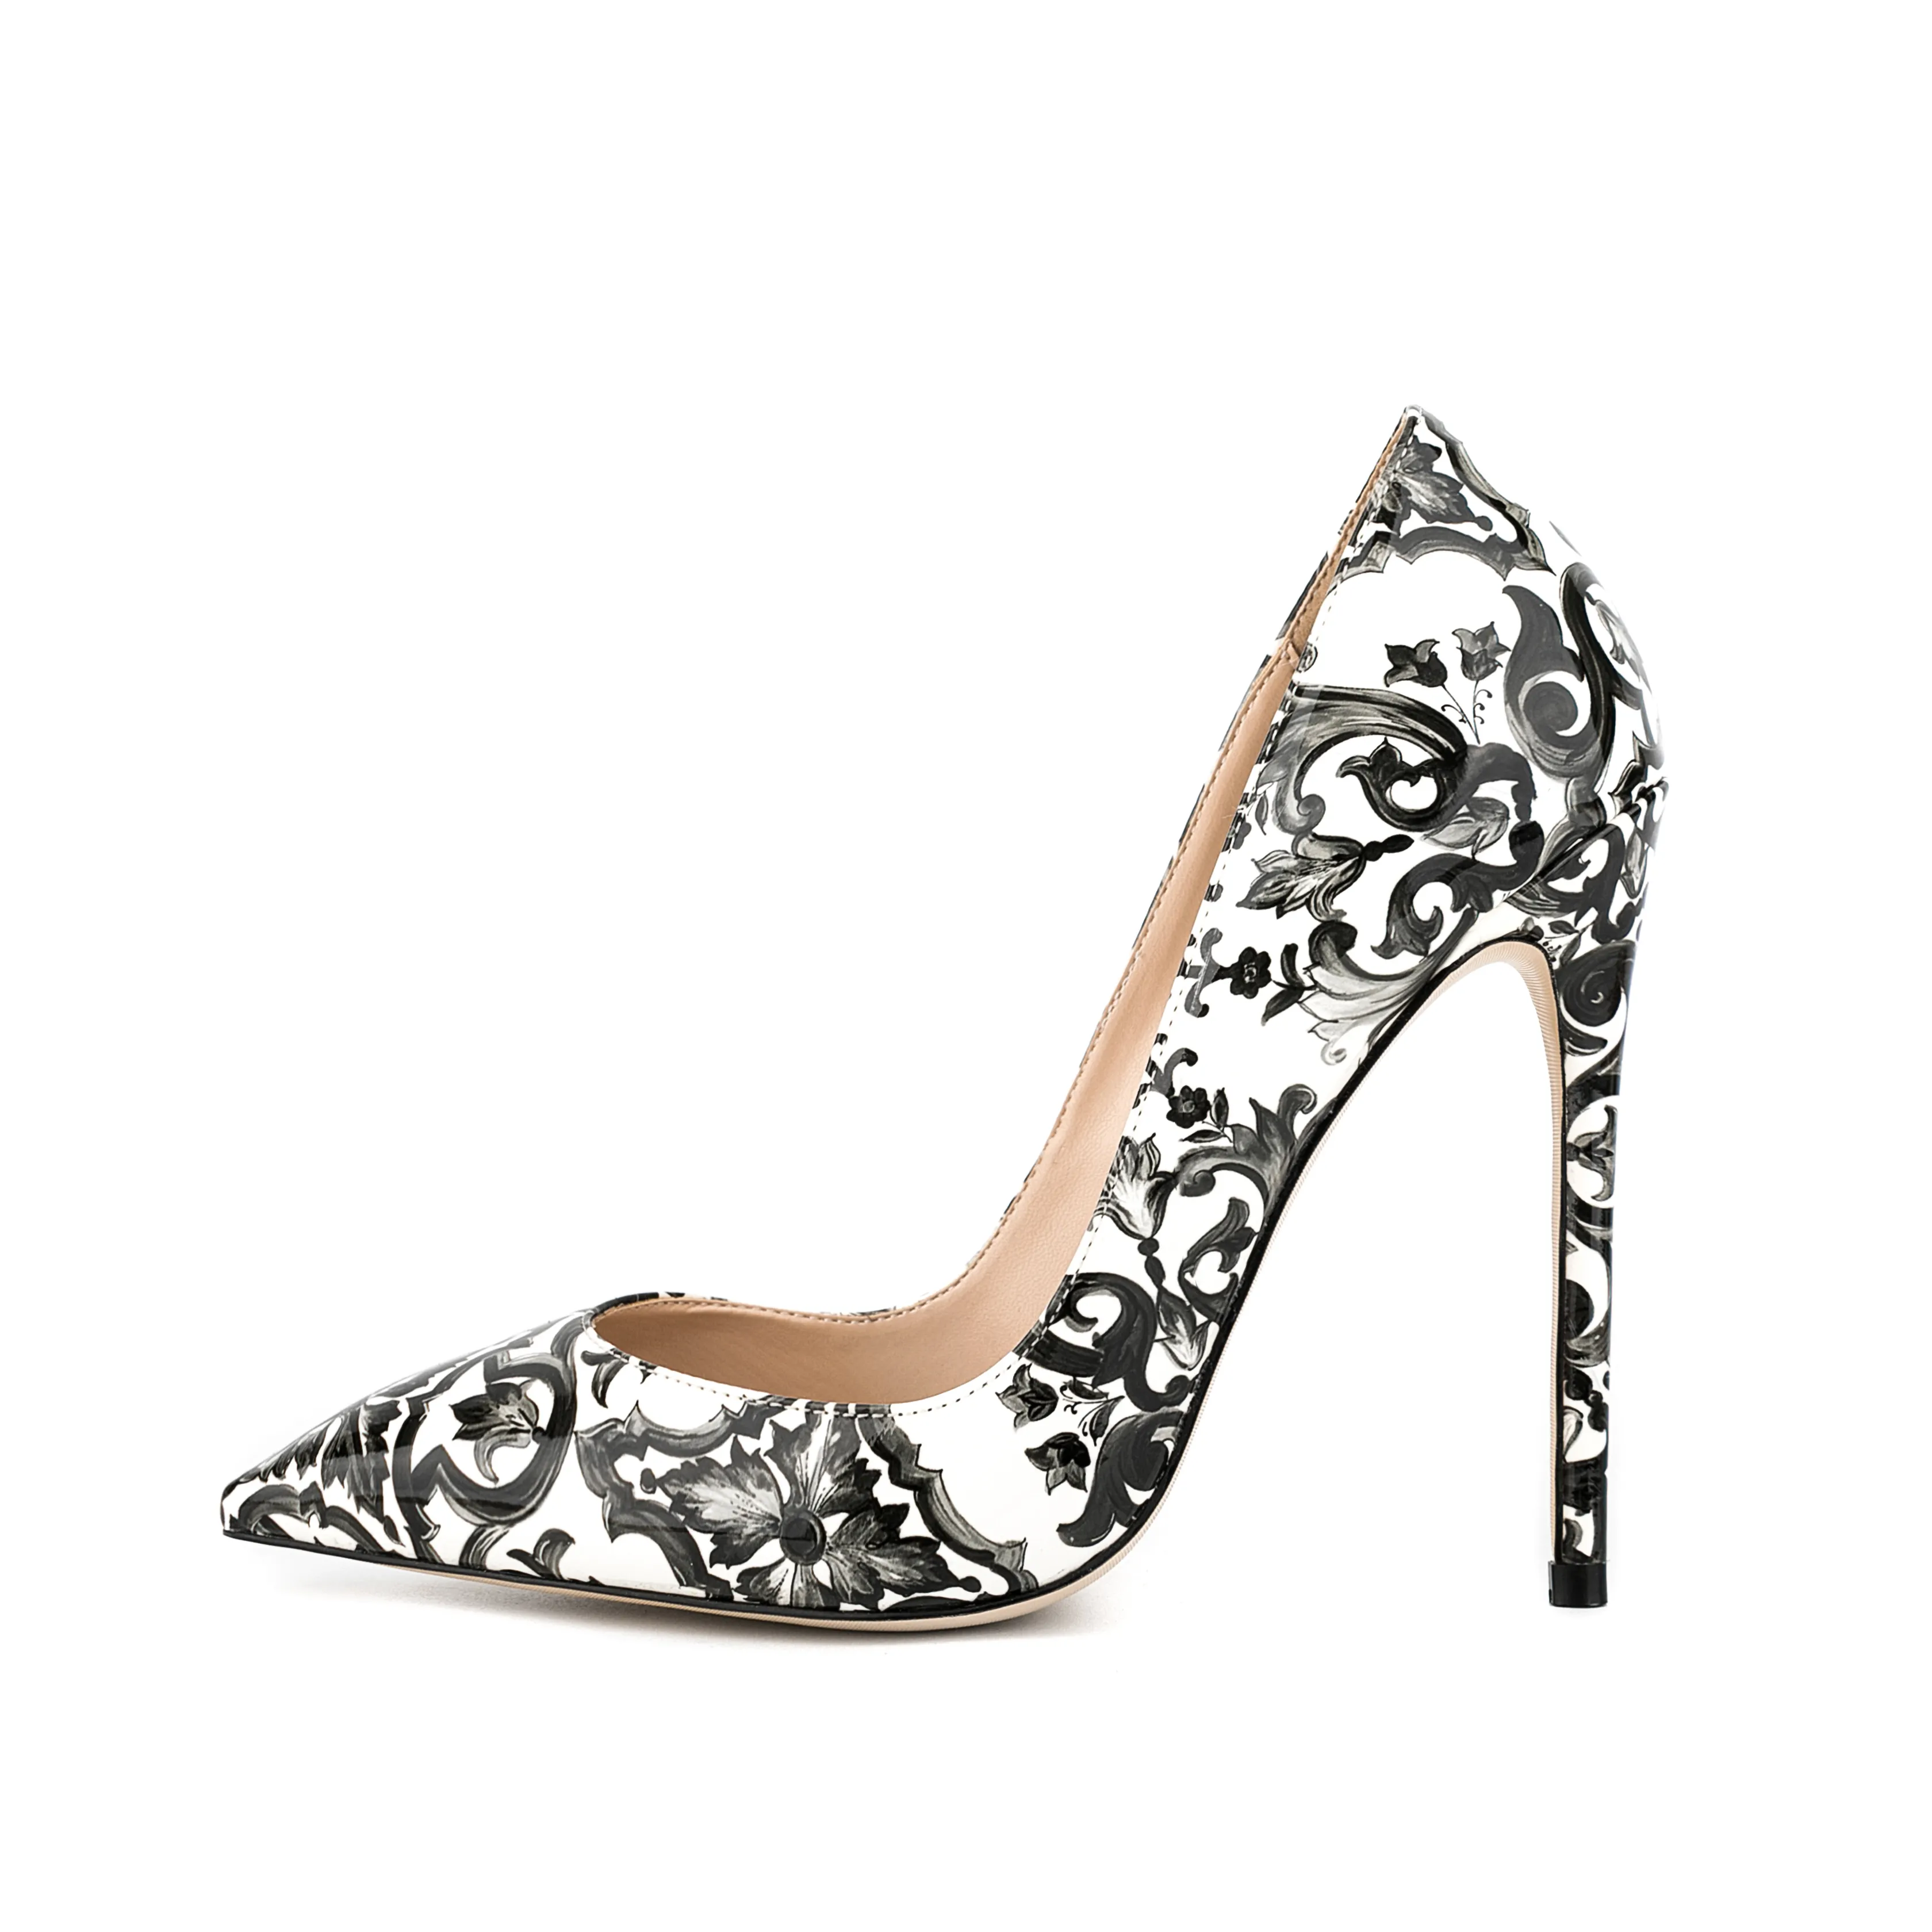 2023 Spring New Style Party Dress Pointy Stilettos Black White Floral Printed Leather High Heel Pumps Heels Shoes